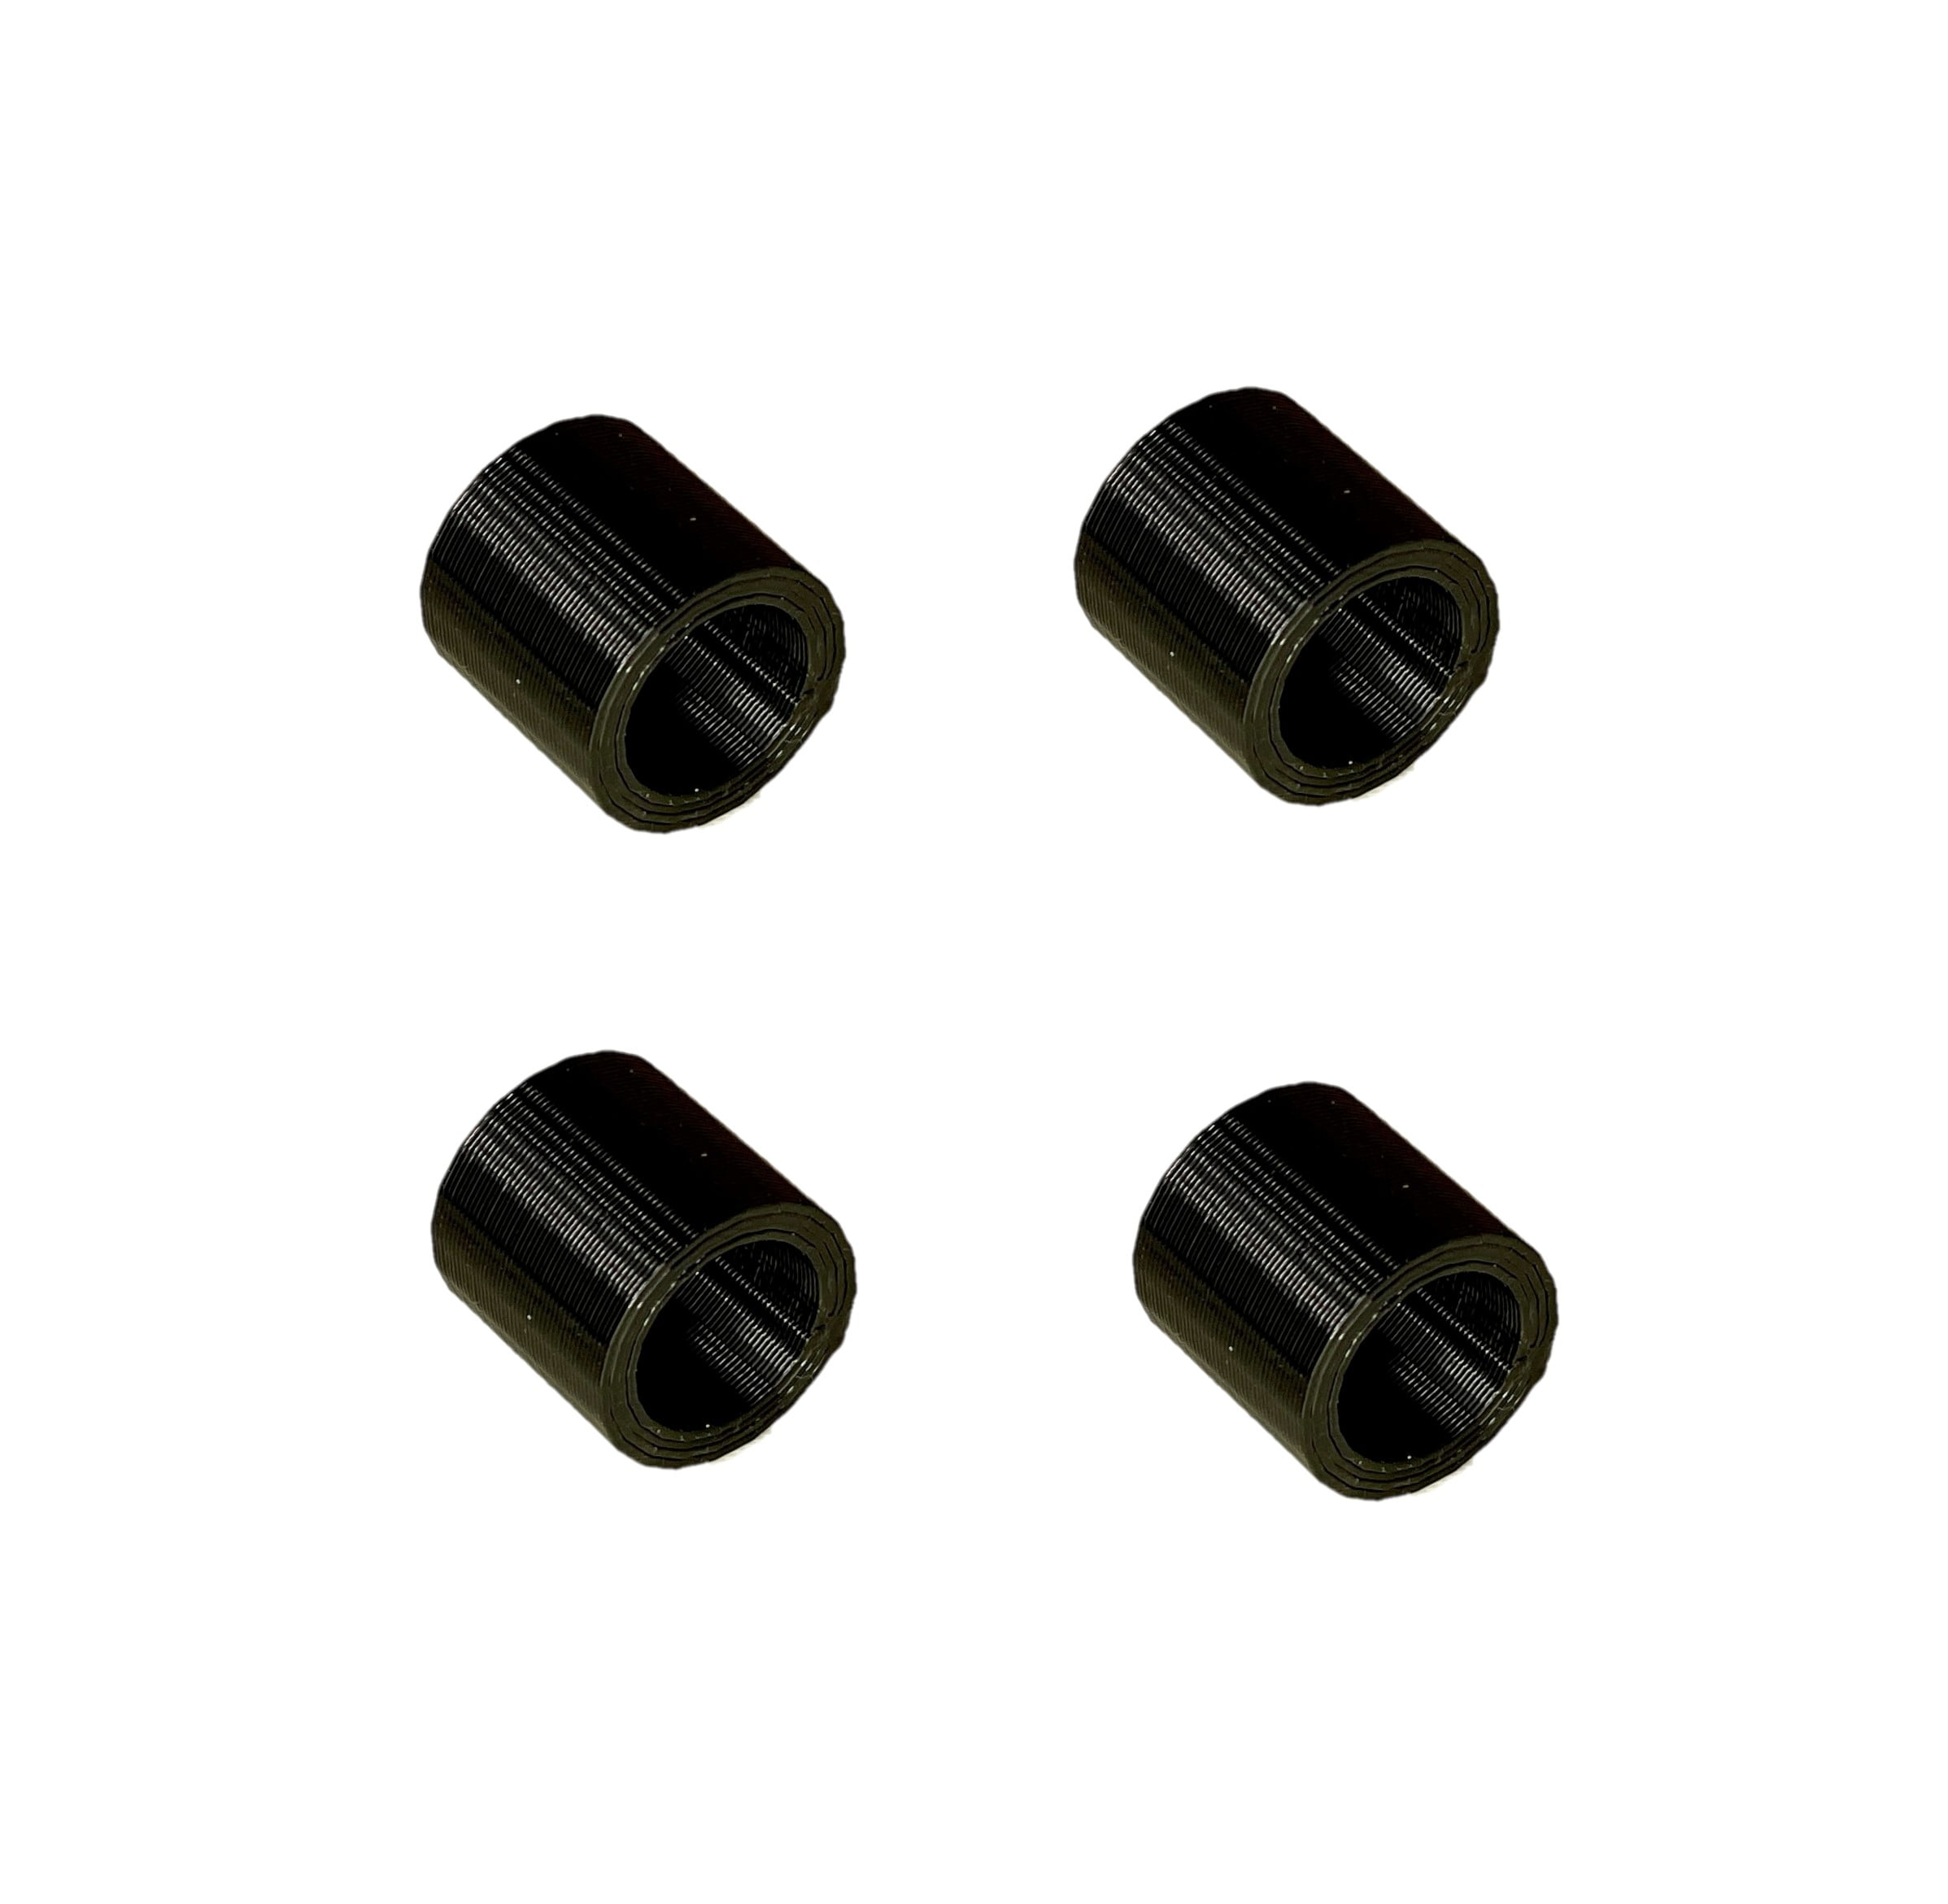  4 Pcs Rubber Roller Resolution for Cricut Maker and 4 Pcs  Rubber Roller Replacement, Keep Rubber in Place with Retaining Rings Keep  Rubber from Moving, Compatible with Cricut Maker/Maker 3